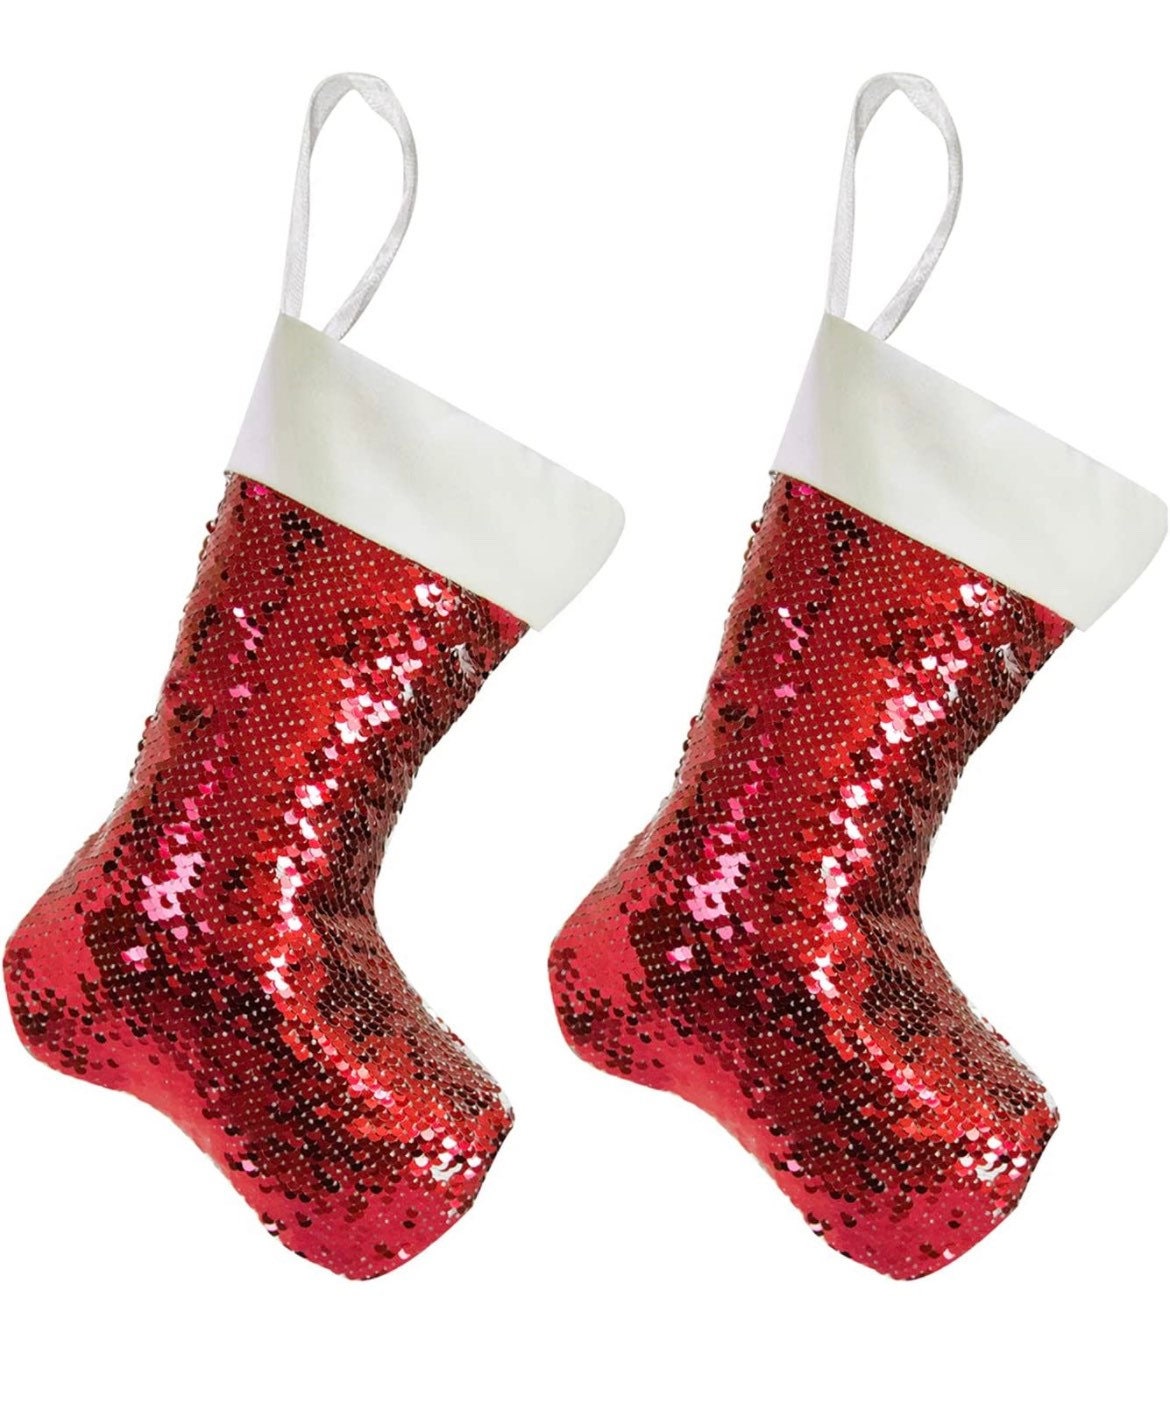 Personalized Sequin Embroidered Holiday Christmas Stockings - Etsy